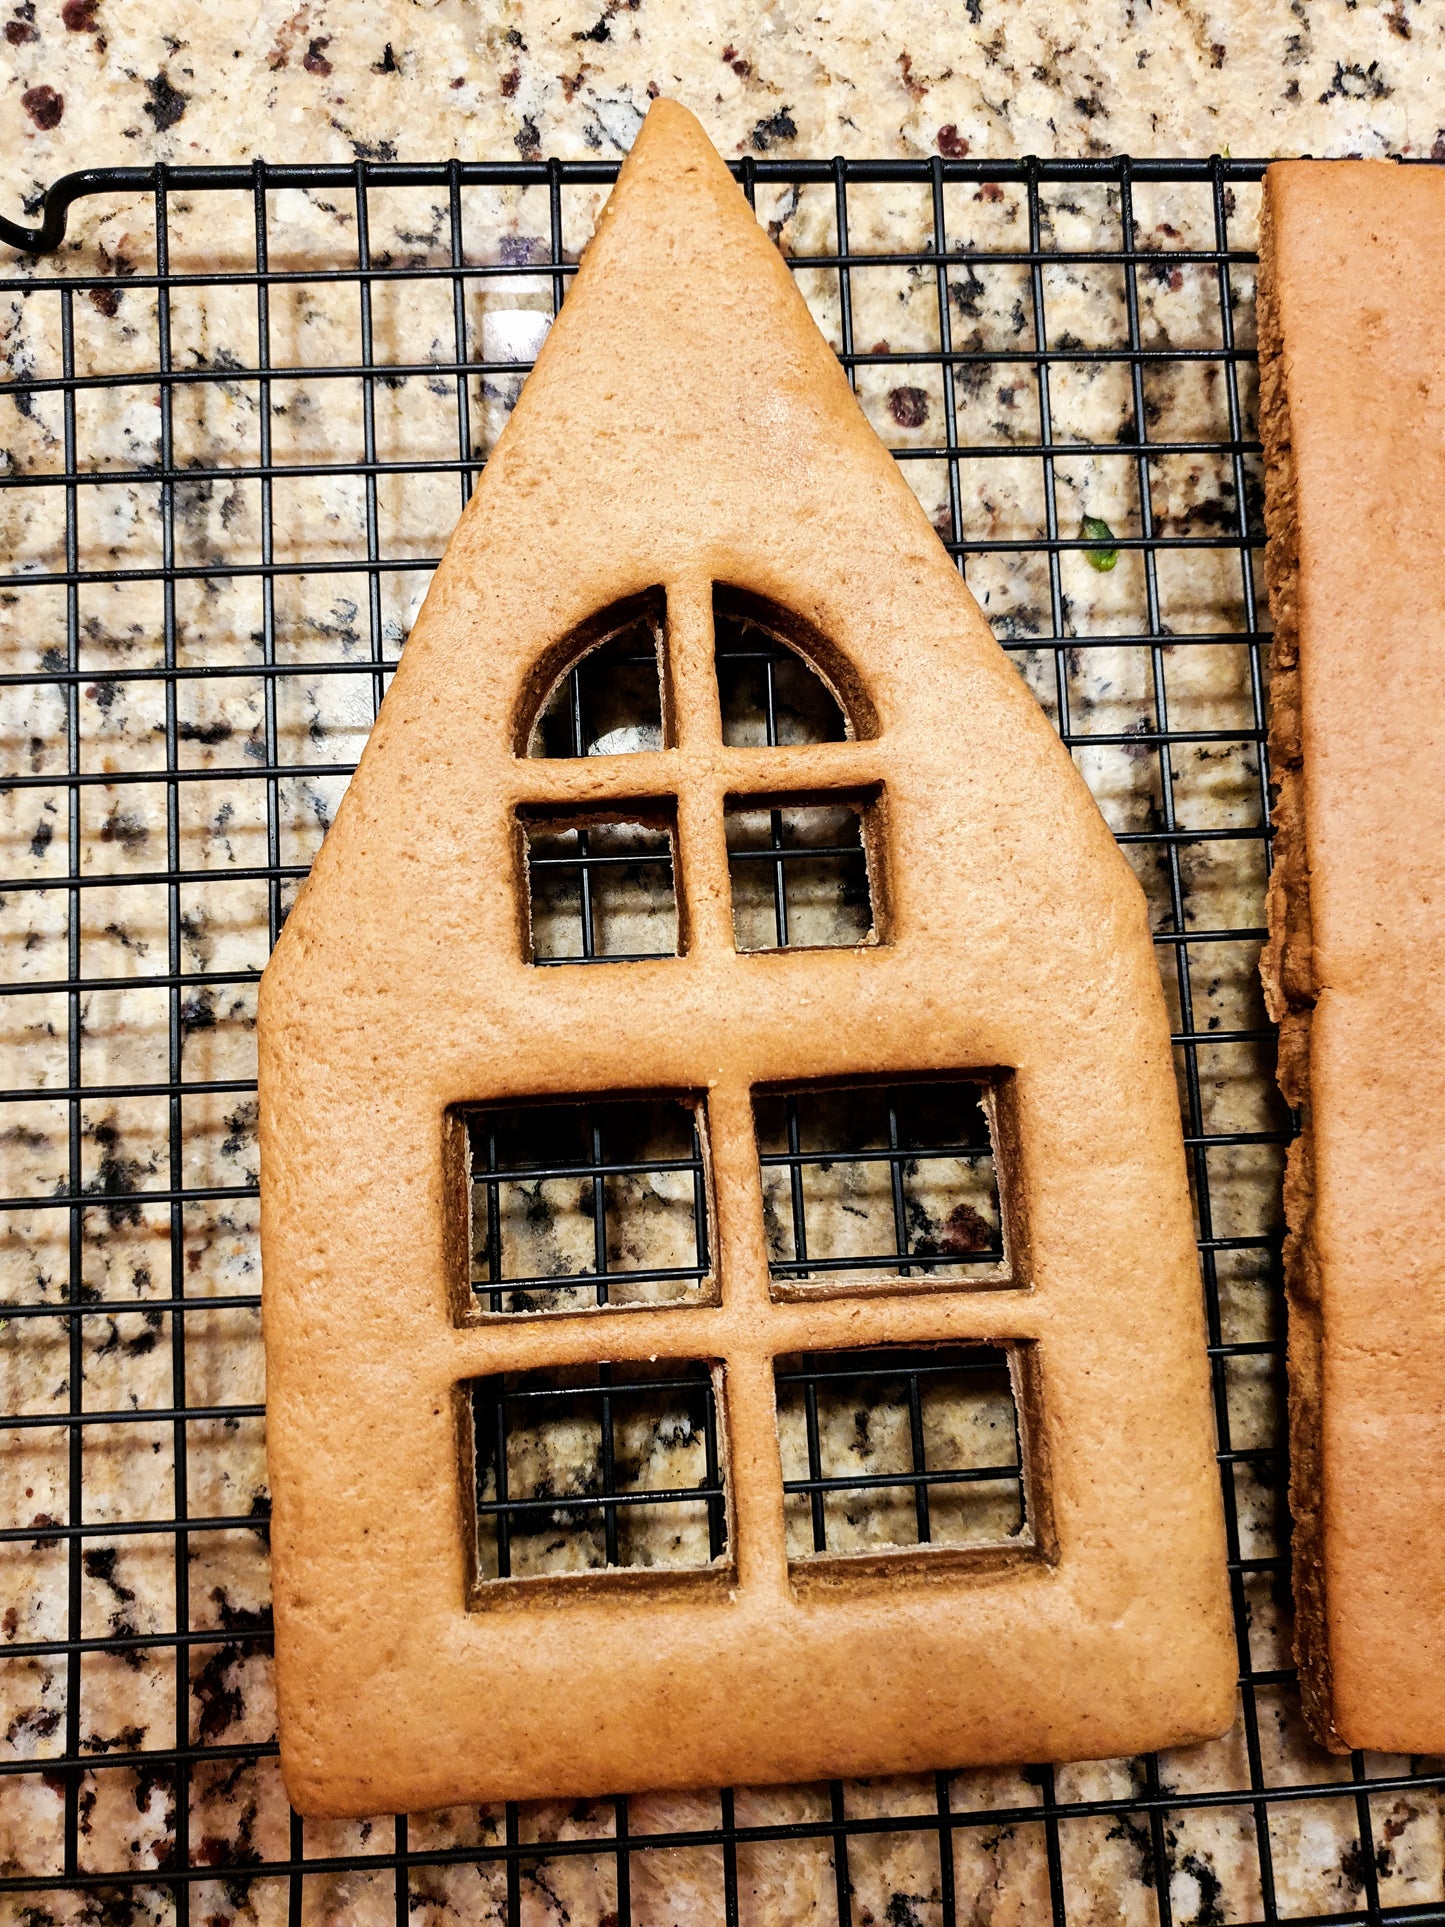 Easy Gingerbread House Pattern Kit For Kids and Adults. Do It Yourself Gingerbread House Cutters For A Fraction Of The Price!